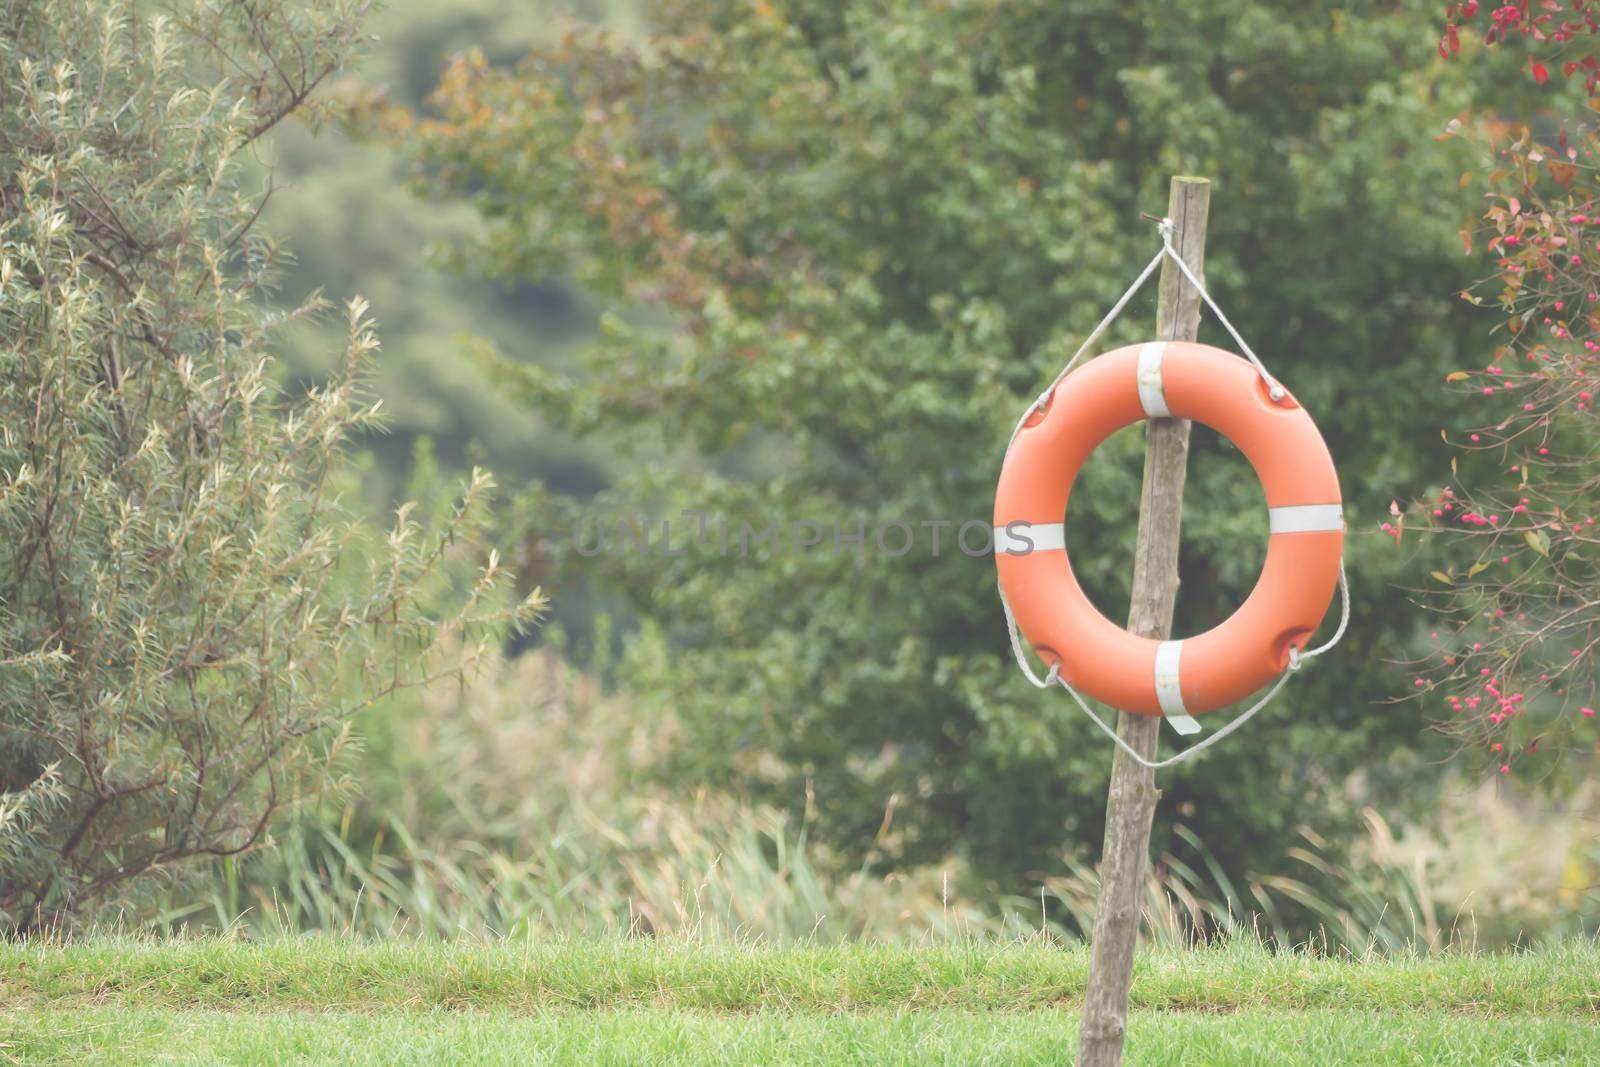 A lifebuoy hangs on the wood